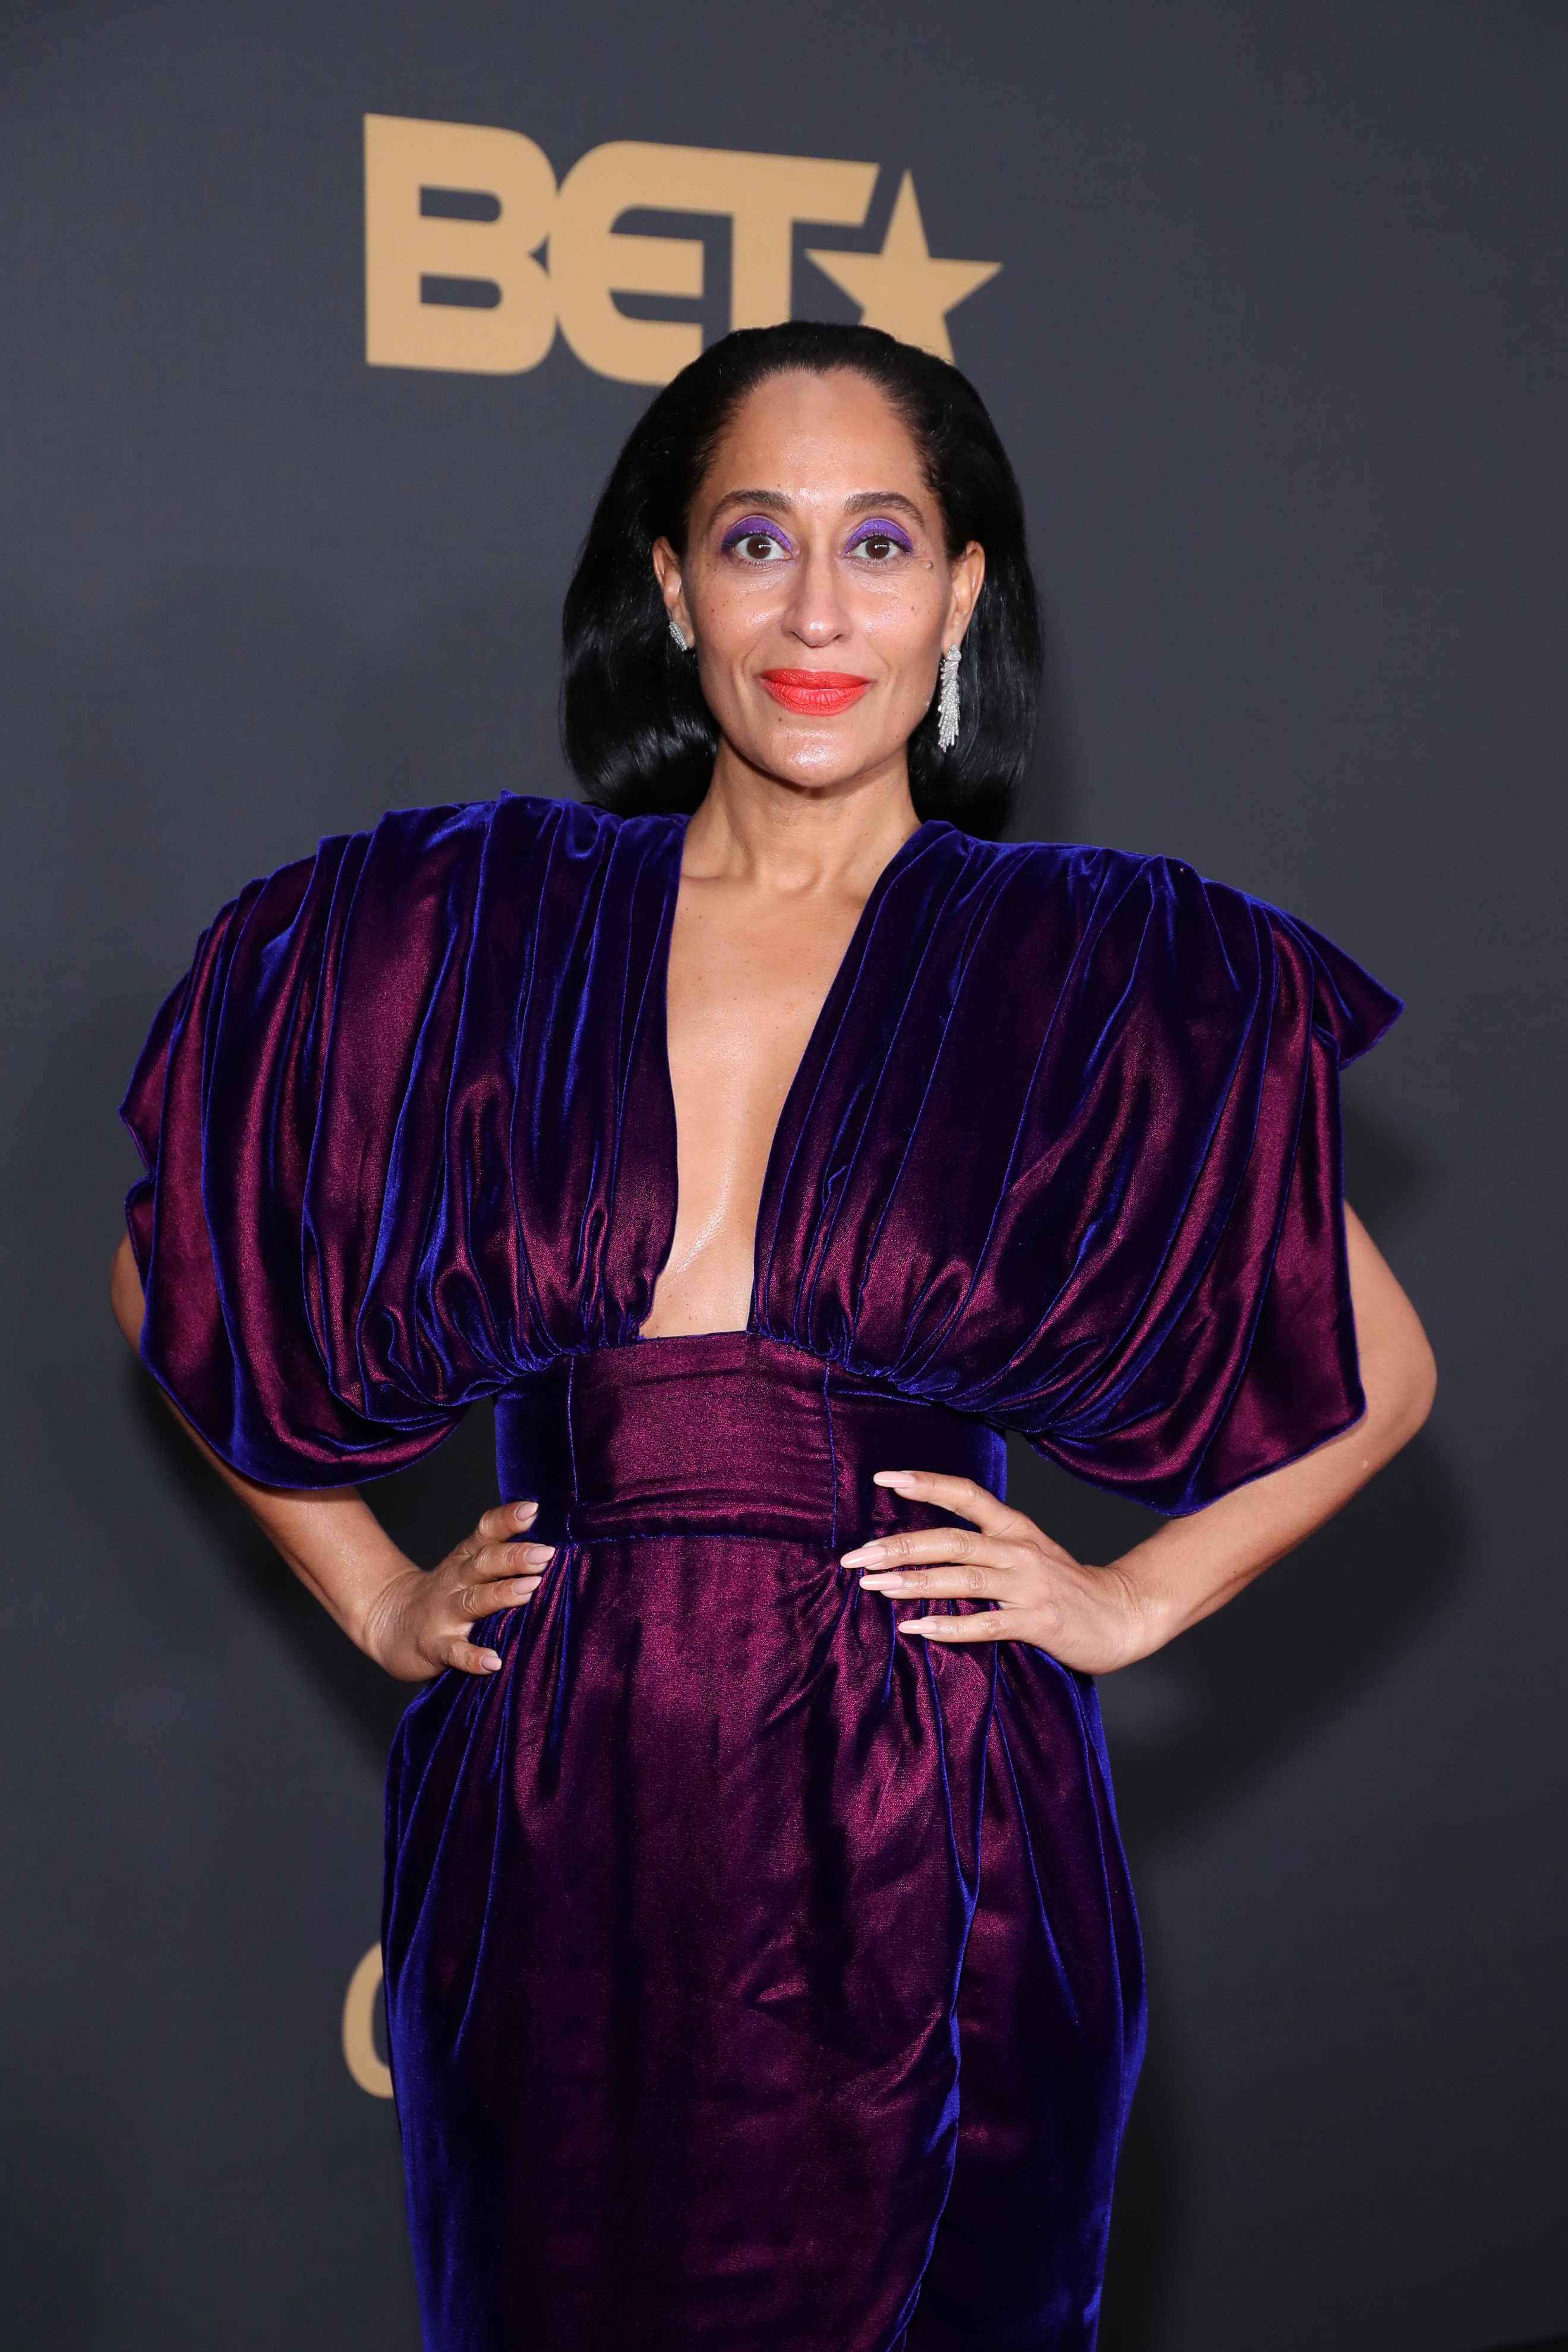 Tracee Ellis Ross attends the 51st NAACP Image Awards at the Pasadena Civic Auditorium on February 22, 2020 in California. | Photo: Getty Images